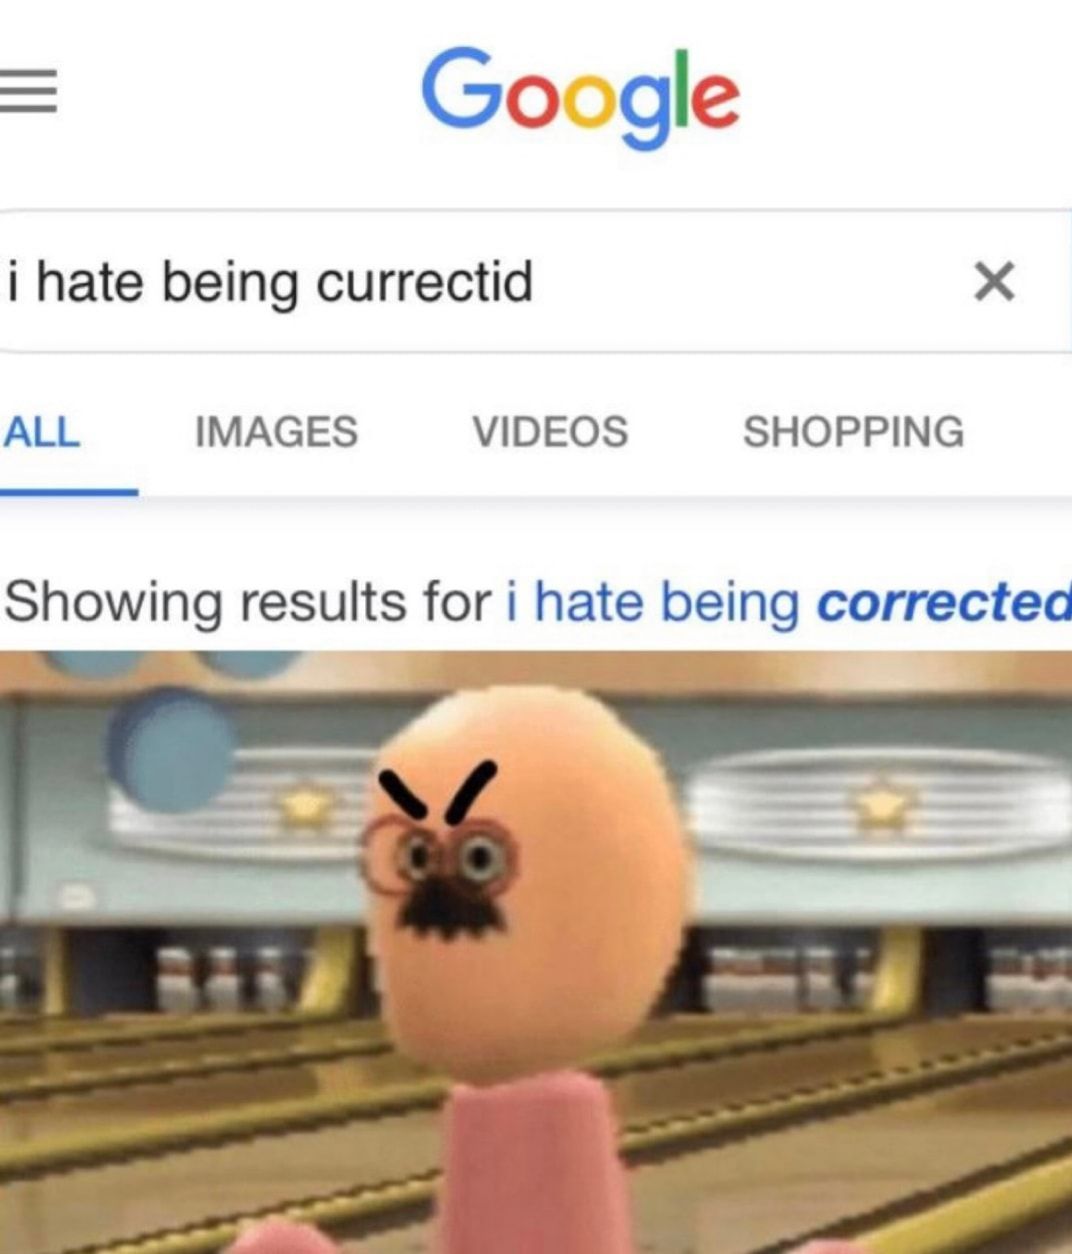 I also hate being currrectids